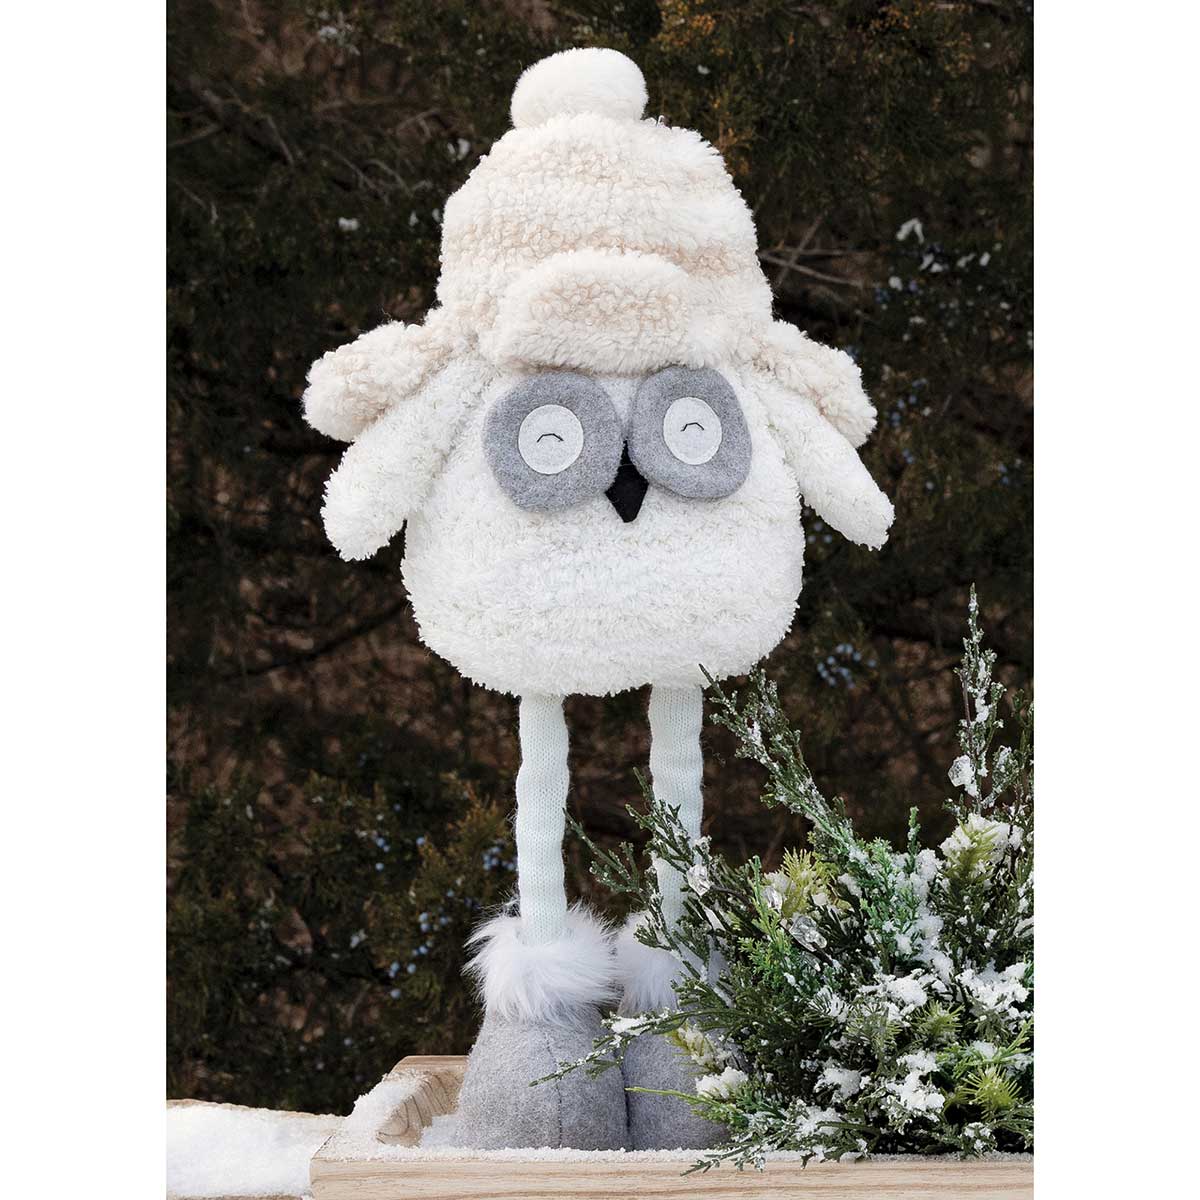 EDDIE OWL EXPANDABLE FUZZY OWL PLUSH WITH STRIPED FLAP HAT - Click Image to Close